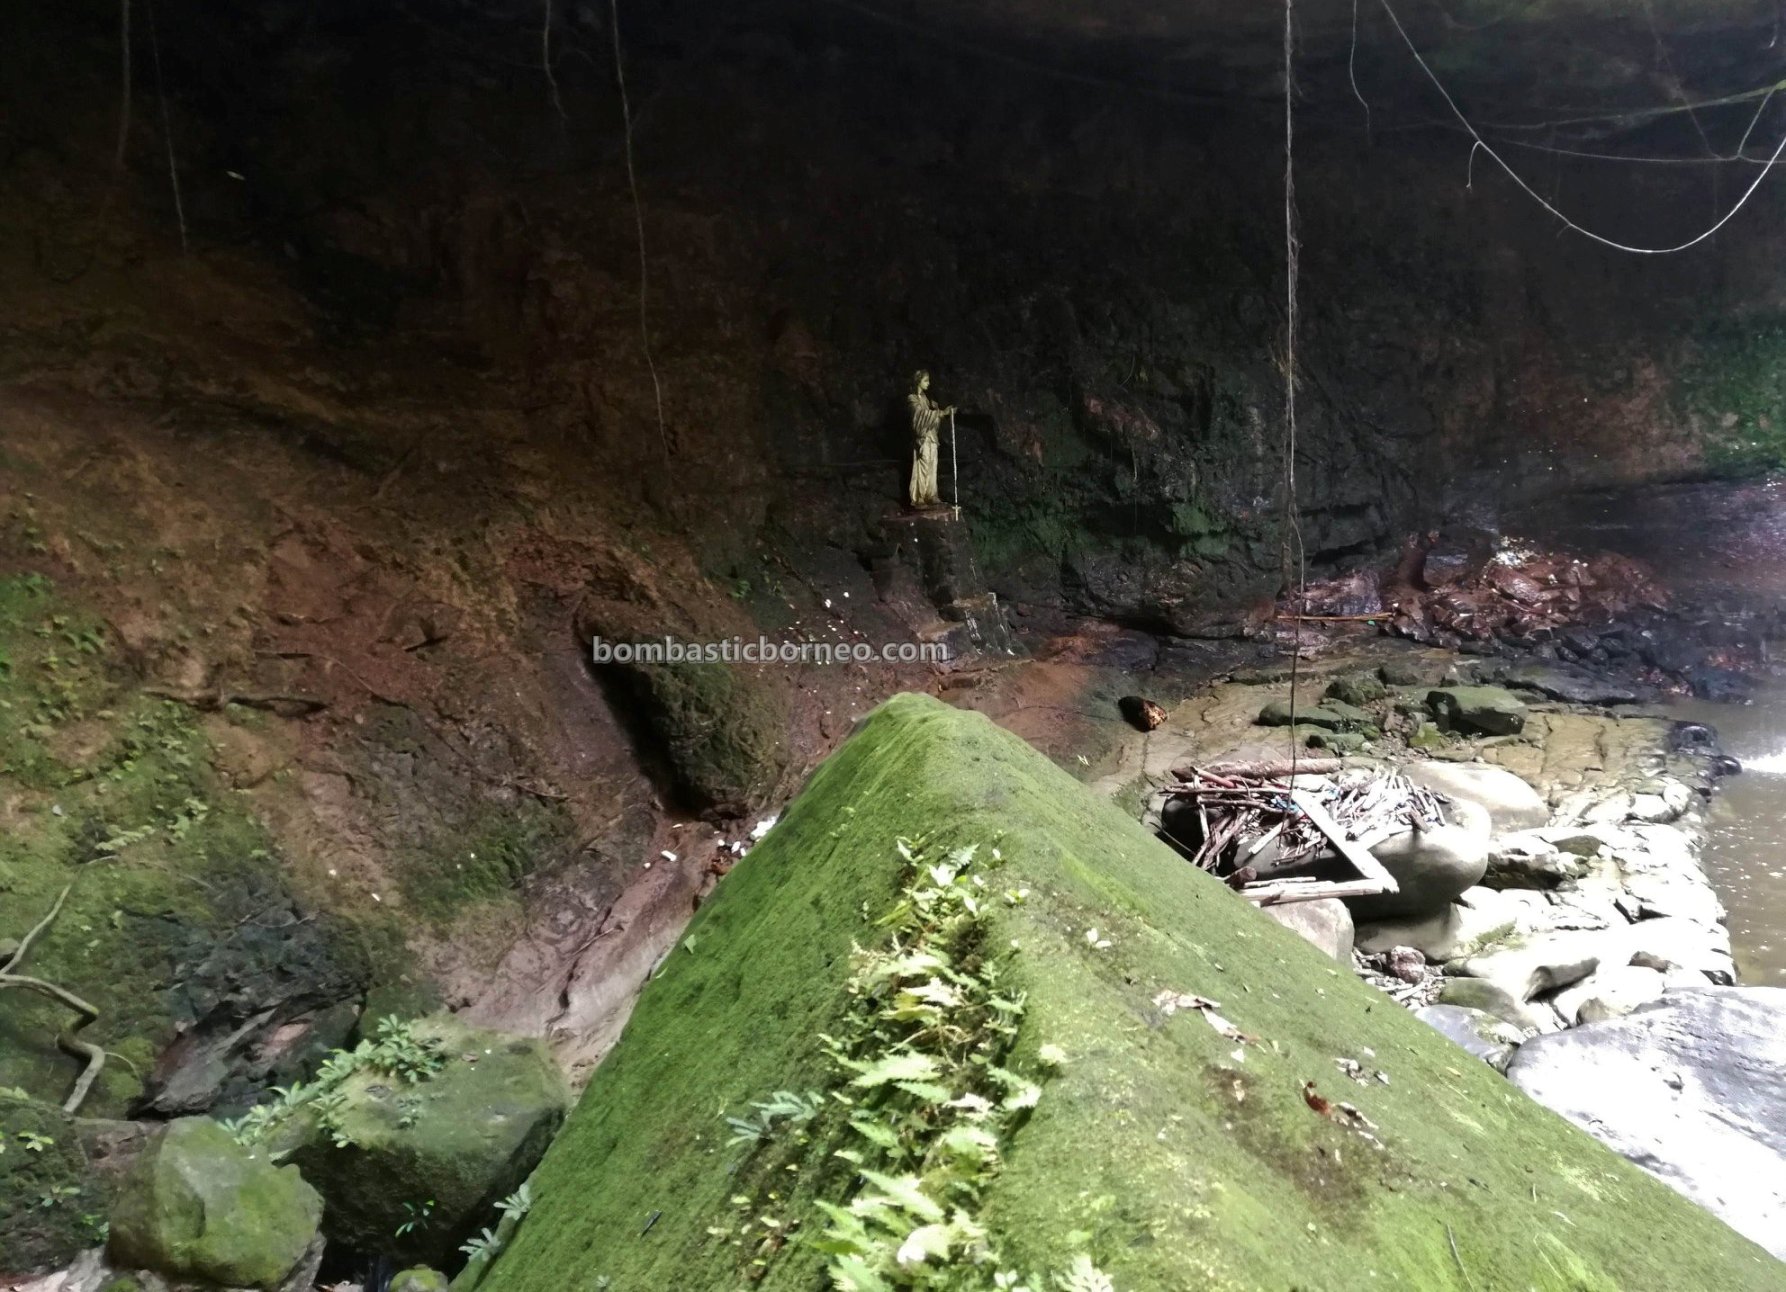 Virgin Mary Grotto, nature, adventure, Riam Macan, Waterfall, catholic, backpackers, Kalimantan Barat, Obyek wisata, Tourist attraction, travel guide, Cross Border, 印尼西加里曼丹, 婆罗洲上侯旅游